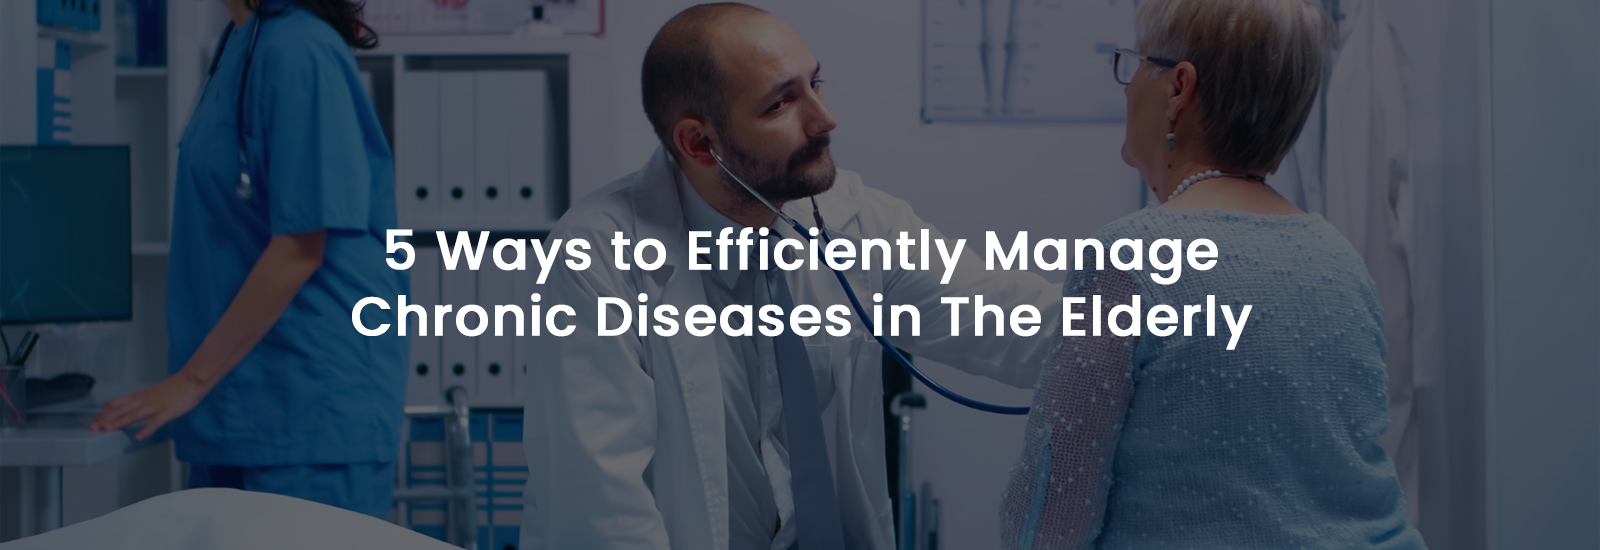 5 Ways to Efficiently Manage Chronic Diseases in The Elderly